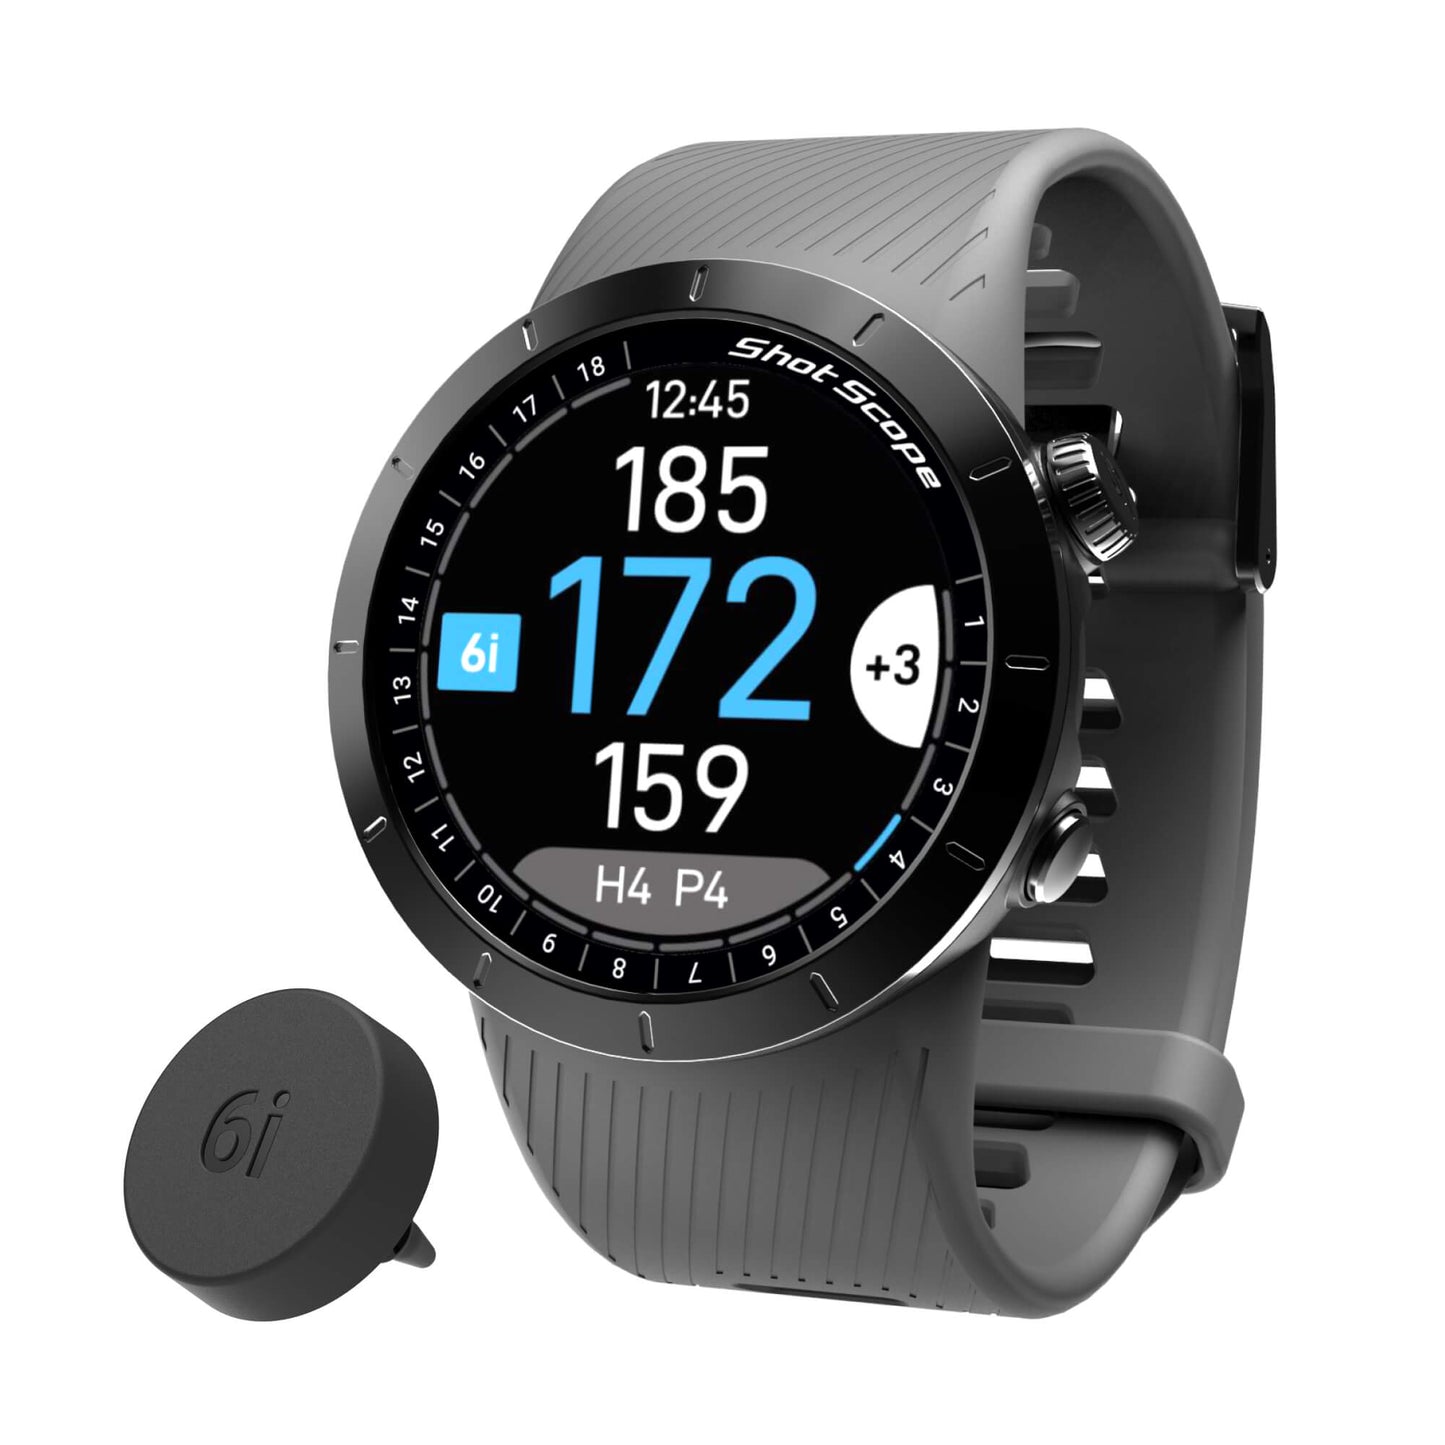 Shot Scope X5 Premium Golf GPS Watch with Automatic Performance Tracking Grey  